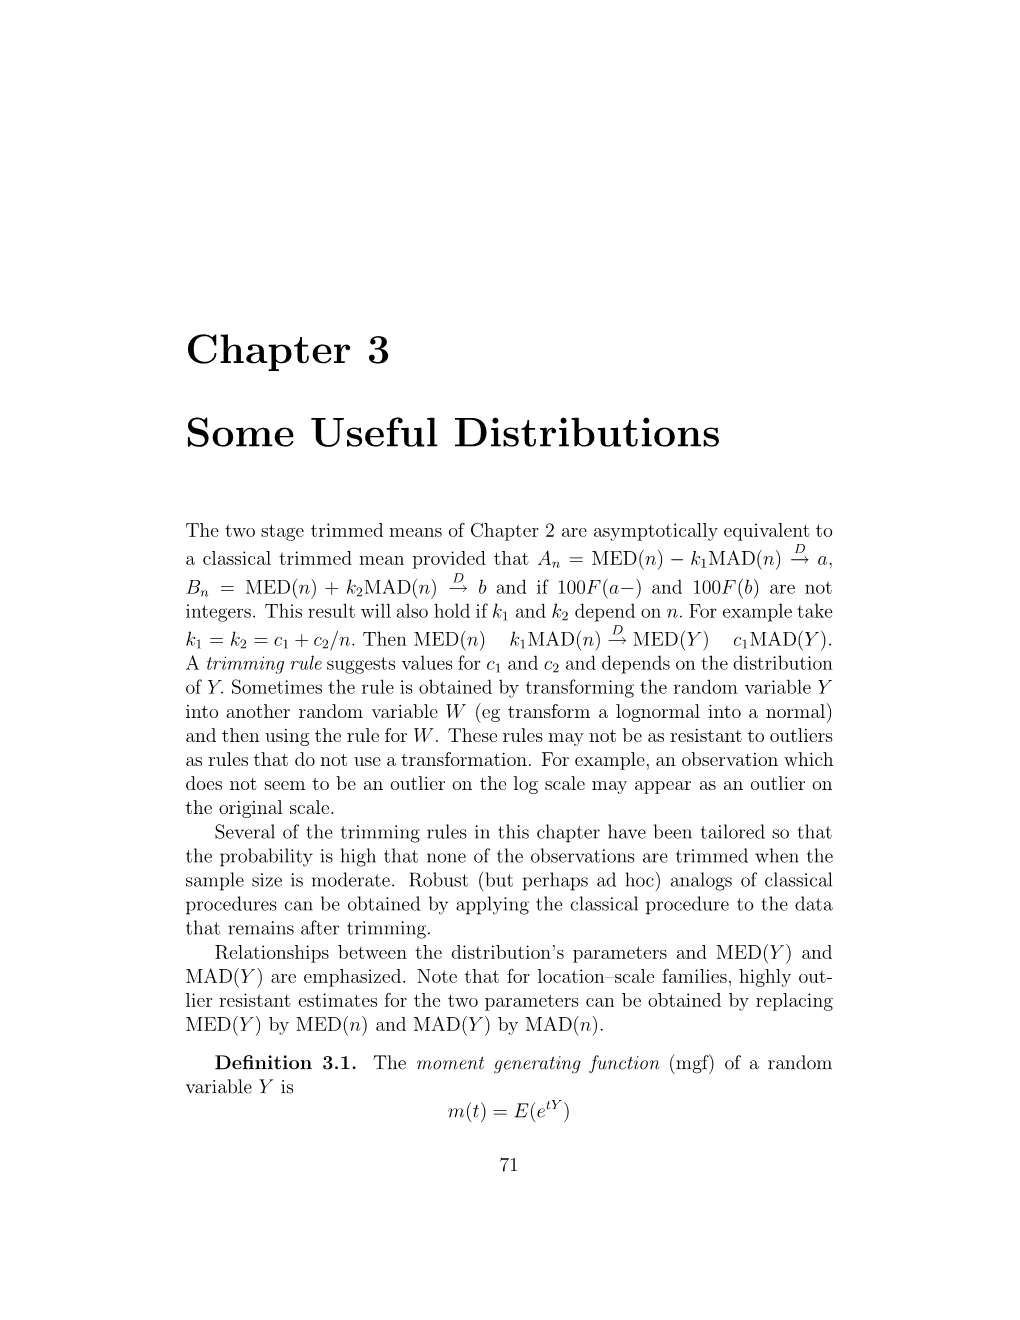 Chapter 3 Some Useful Distributions